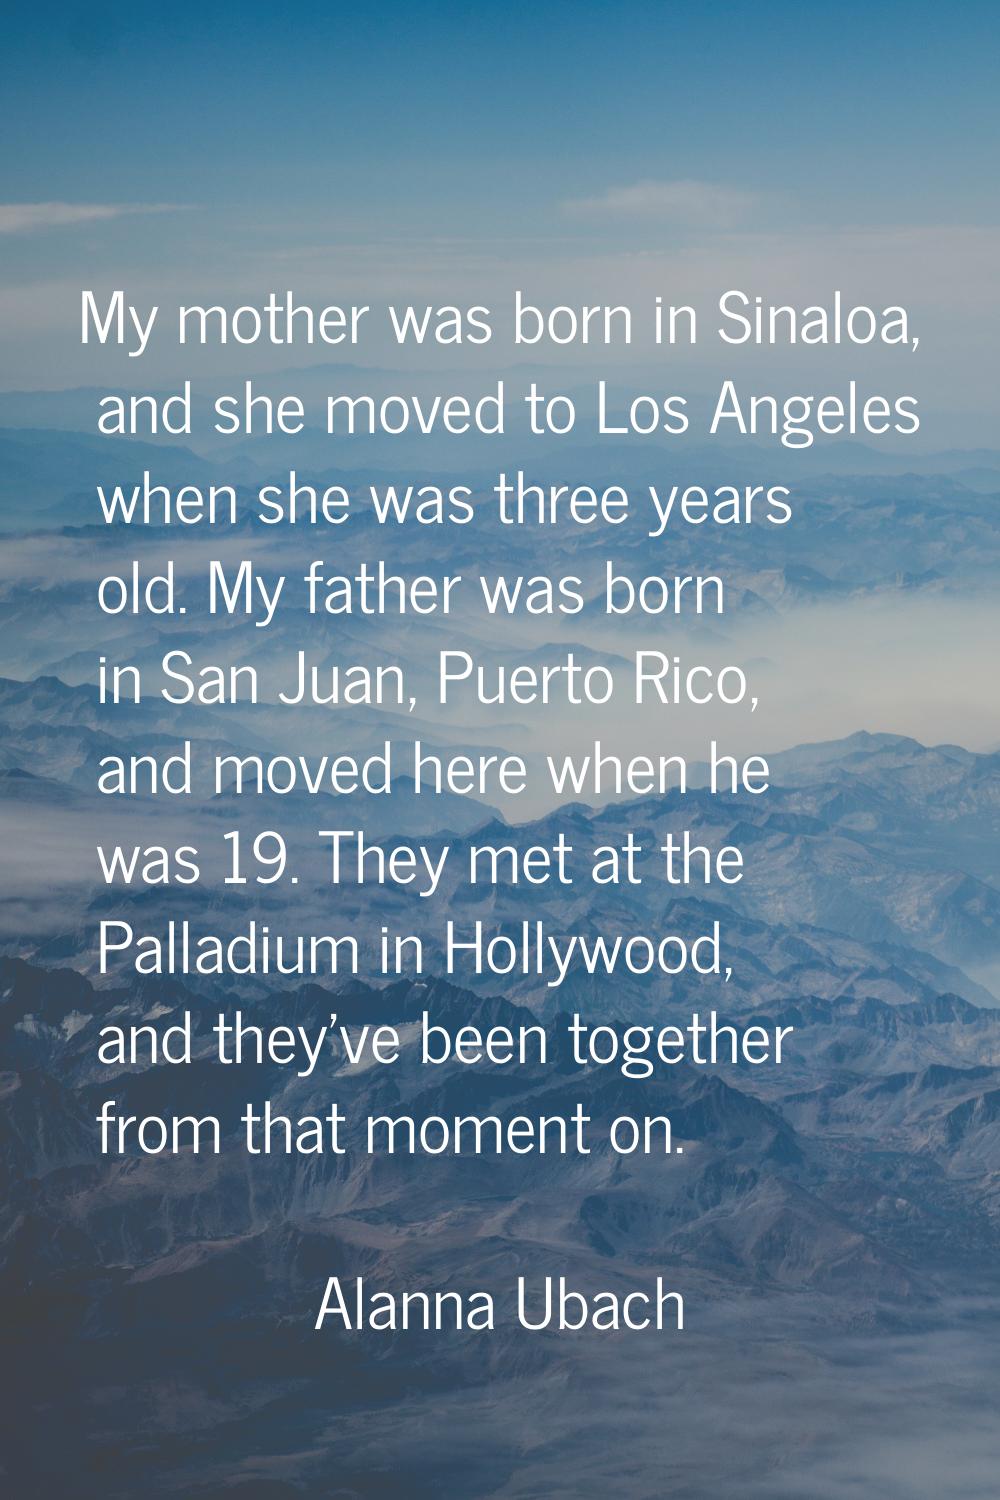 My mother was born in Sinaloa, and she moved to Los Angeles when she was three years old. My father